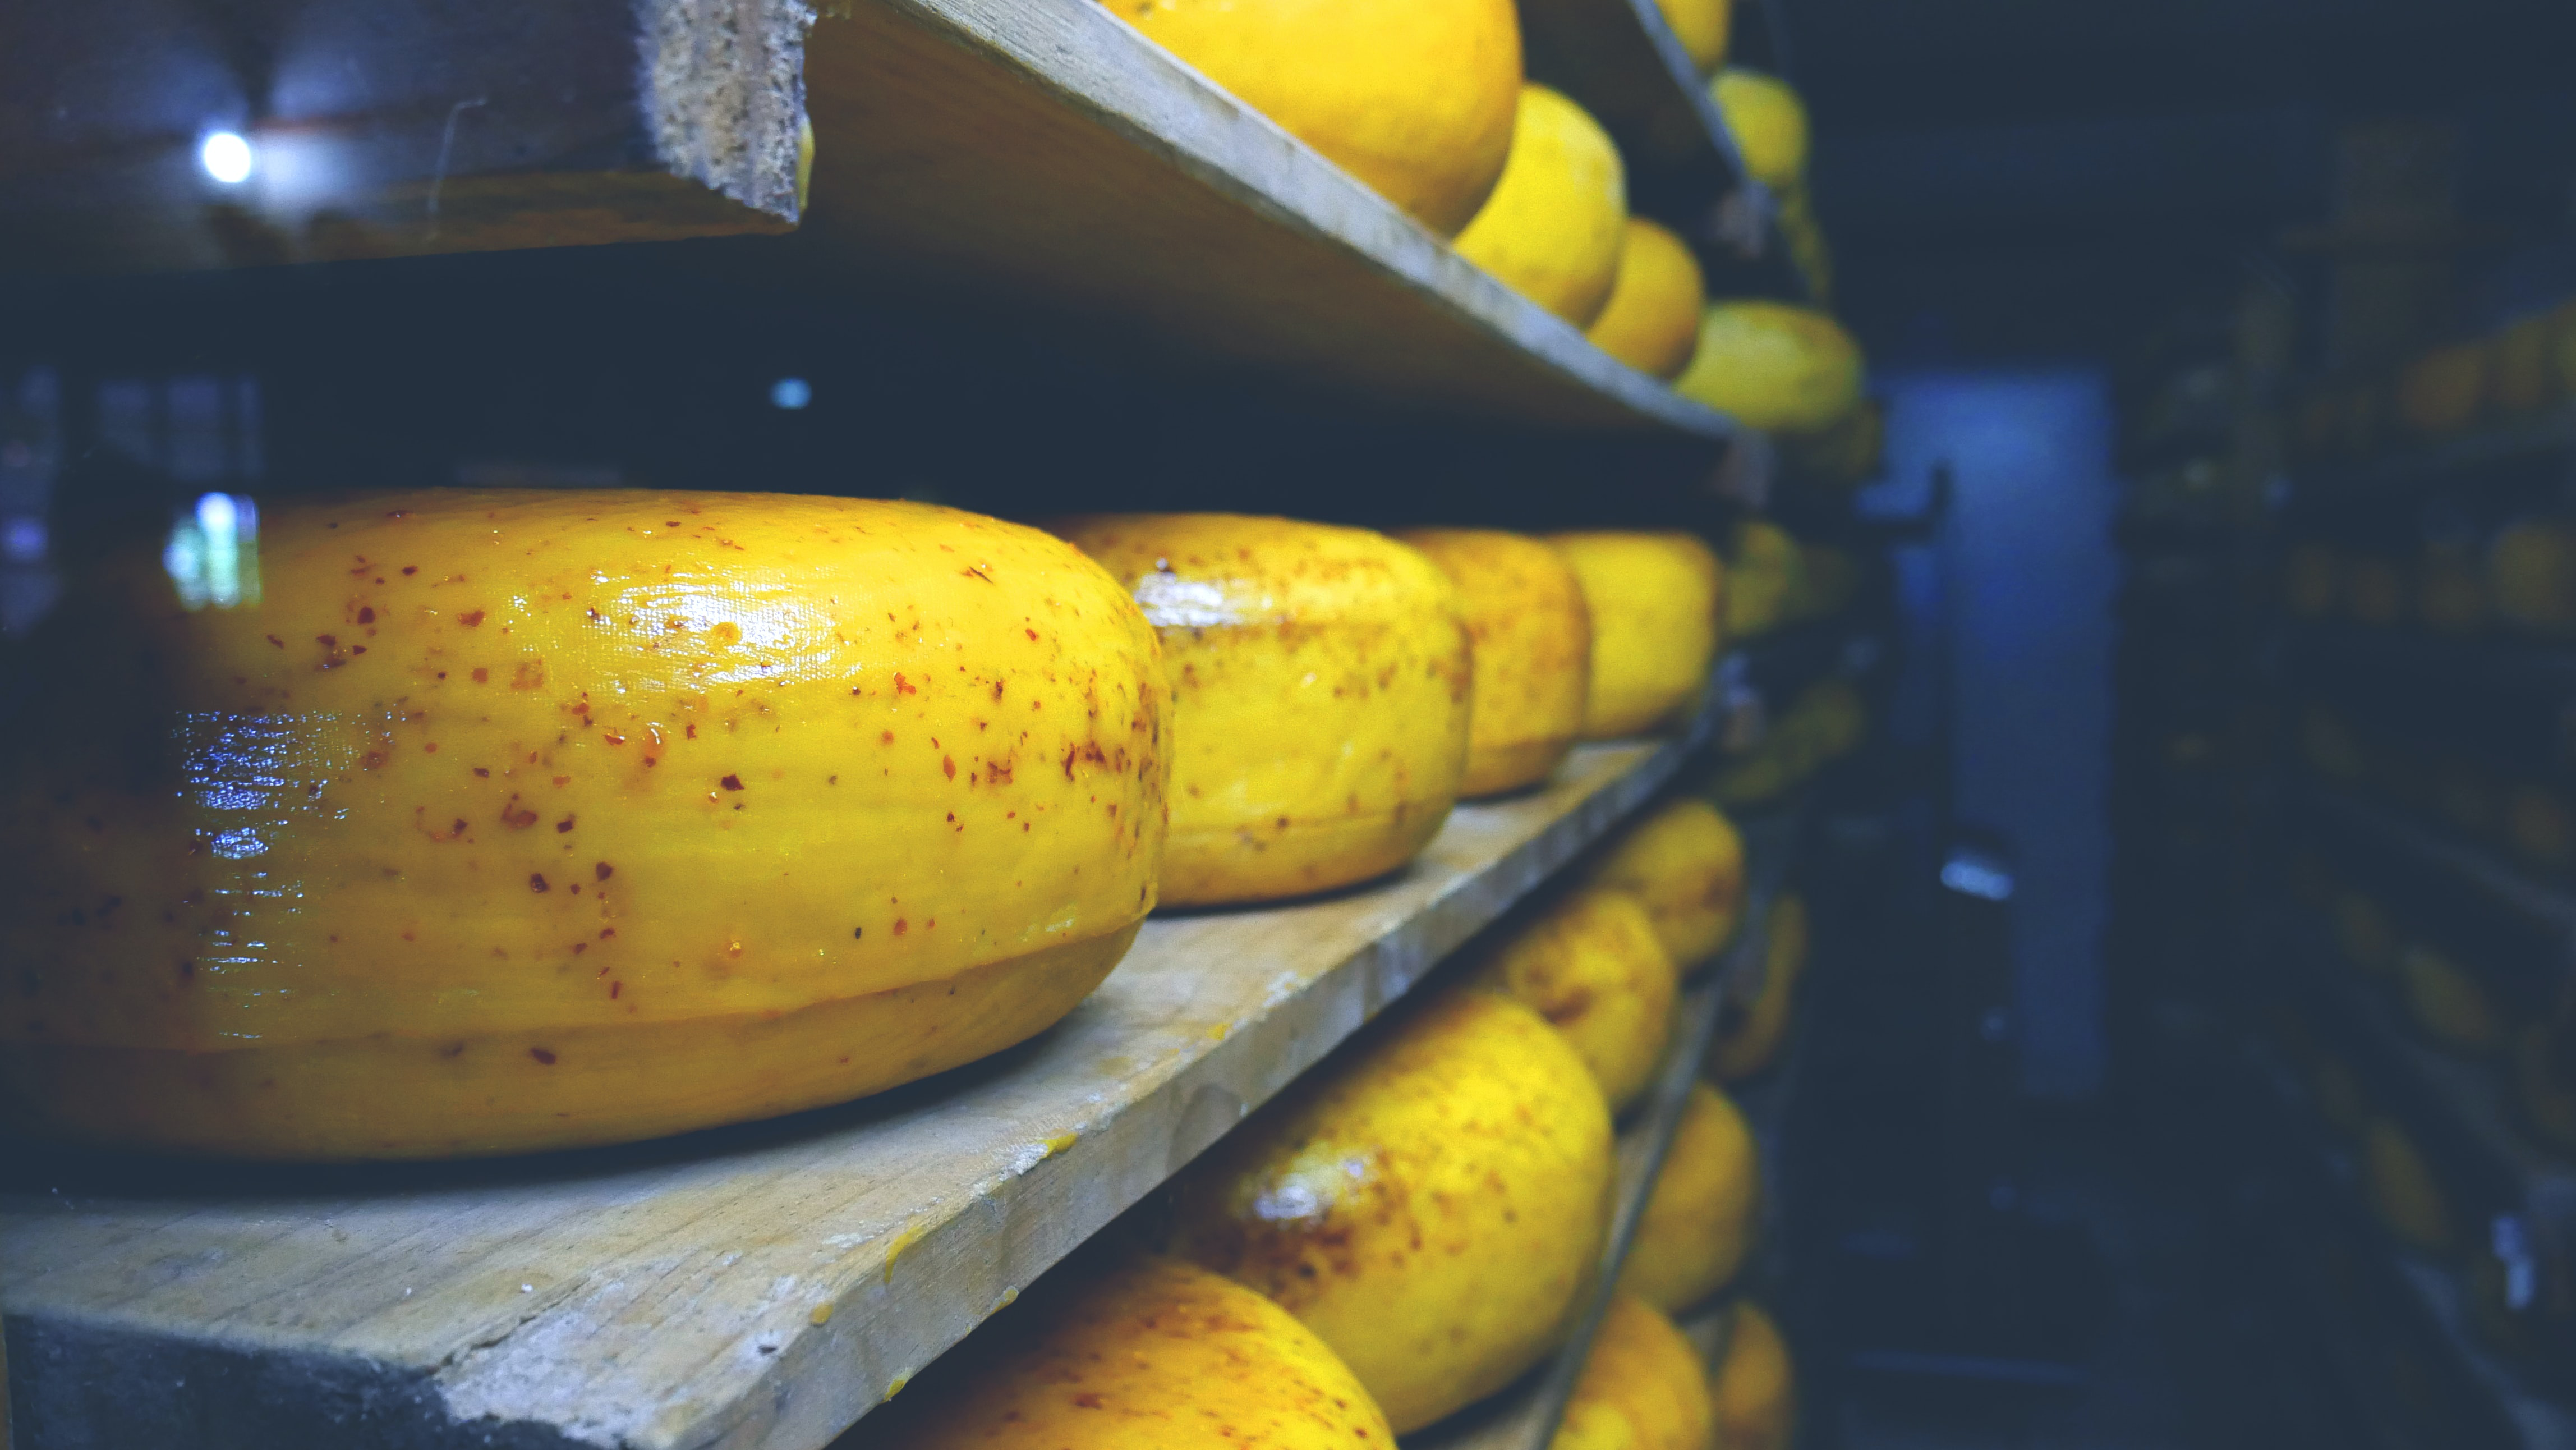 Cheese needs to be more sustainable - here are three innovations to keep it tasty